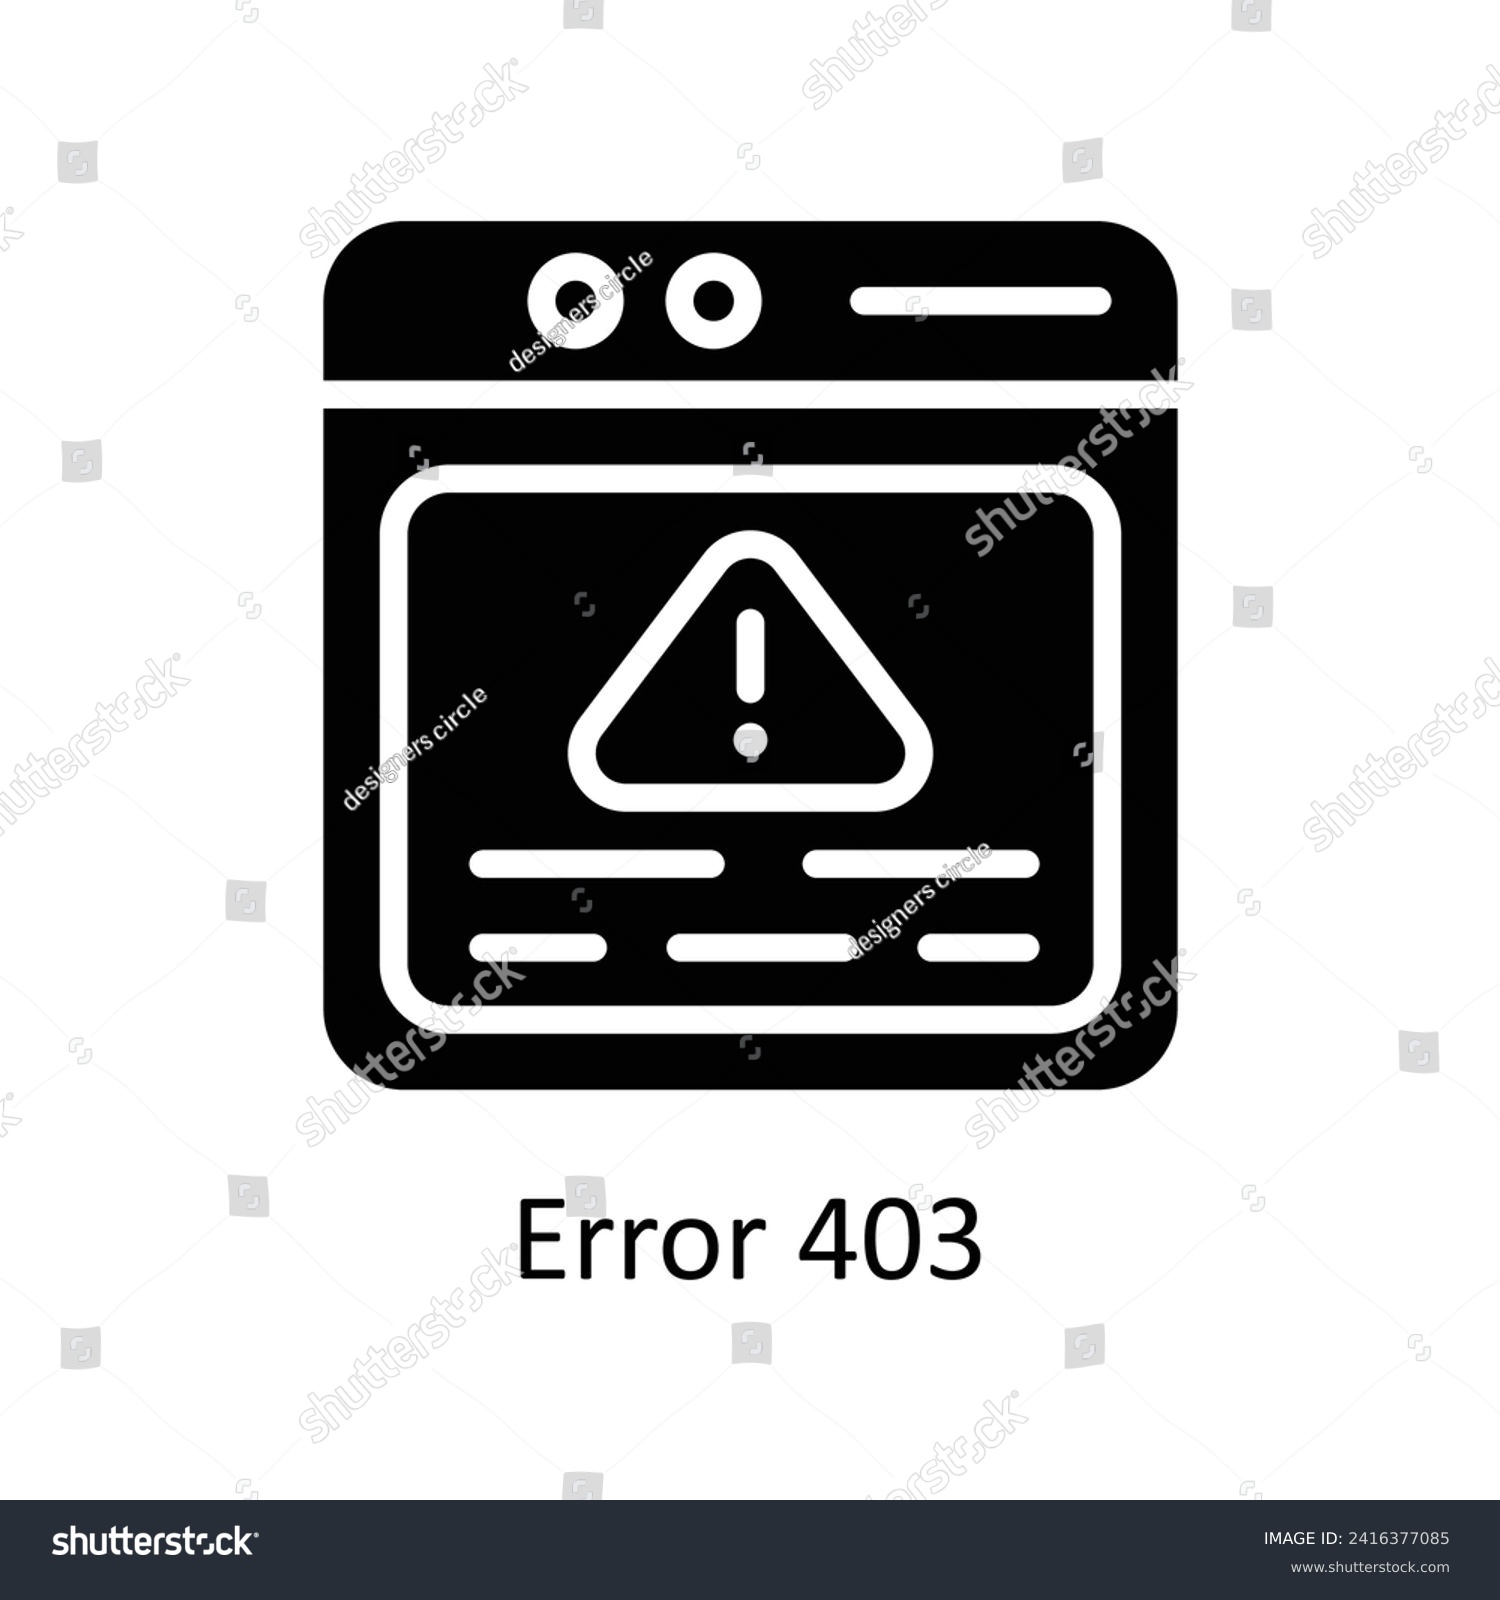 SVG of Error 403  vector Solid icon style illustration. EPS 10 File svg